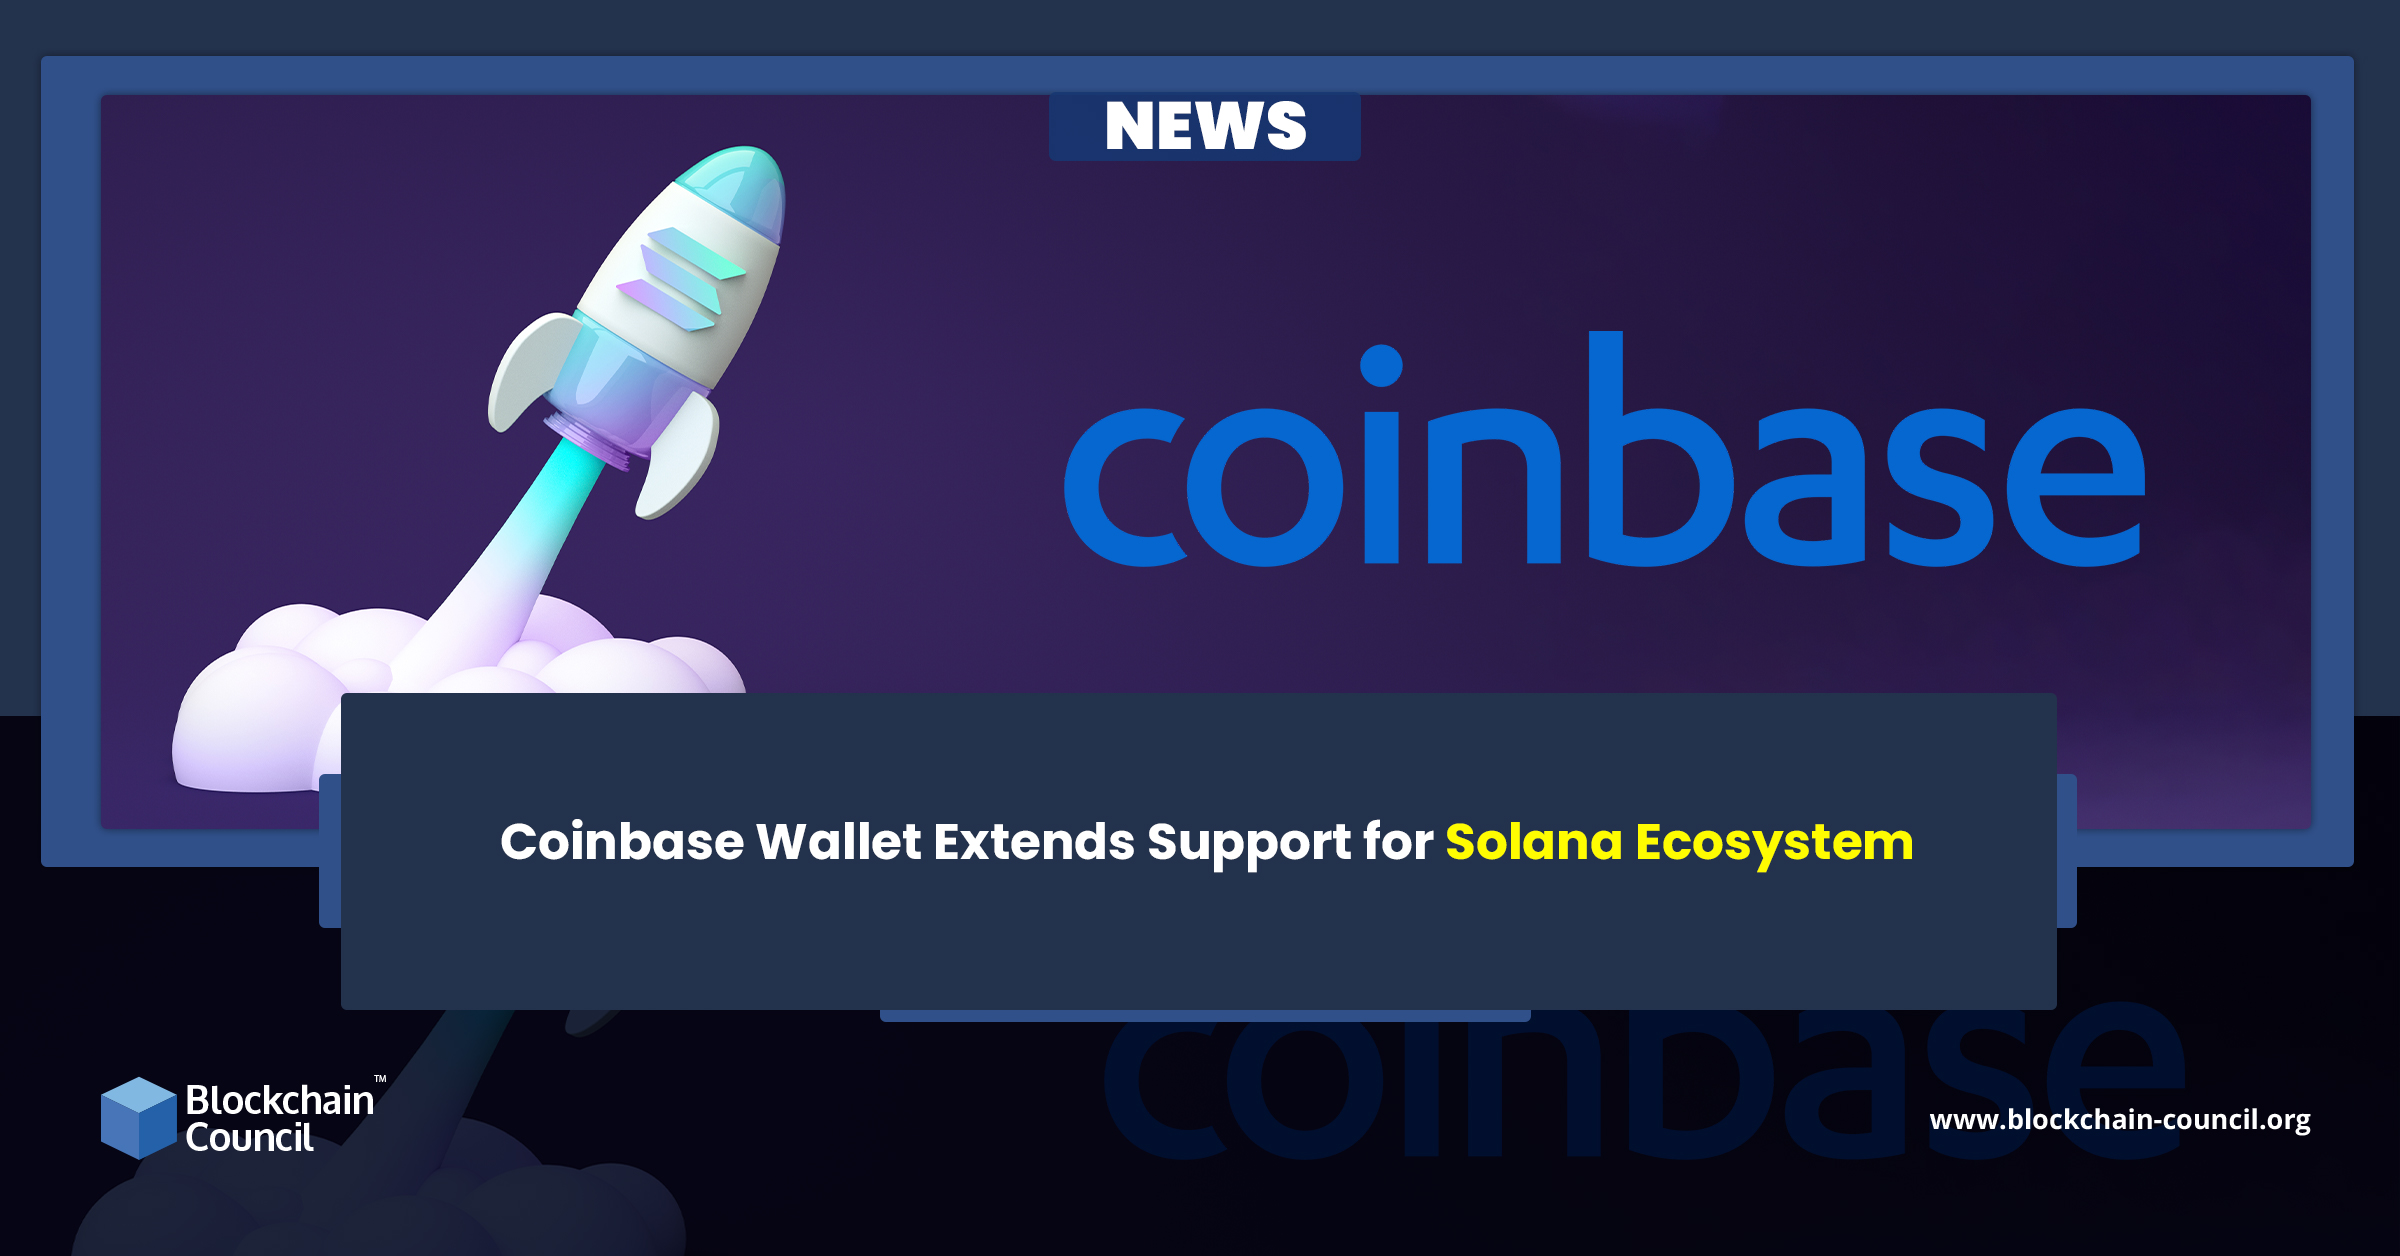 Coinbase Wallet Extends Support for Solana Ecosystem